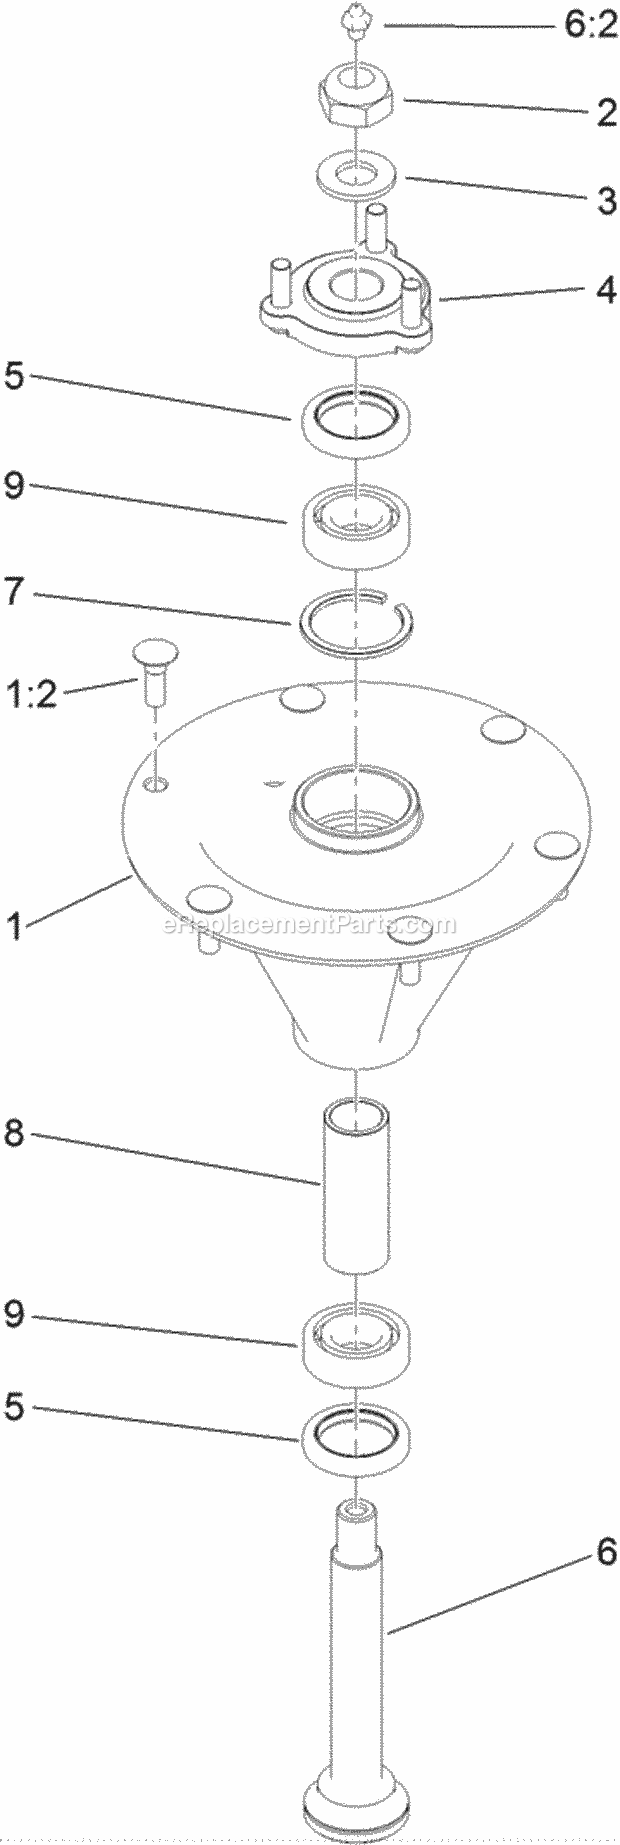 Toro 74902TE (312000001-312999999) Z Master Professional 6000 Series Riding Mower, With 48in Turbo Force Side Discharge Mower, 2 Spindle Assembly No. 119-8560 Diagram